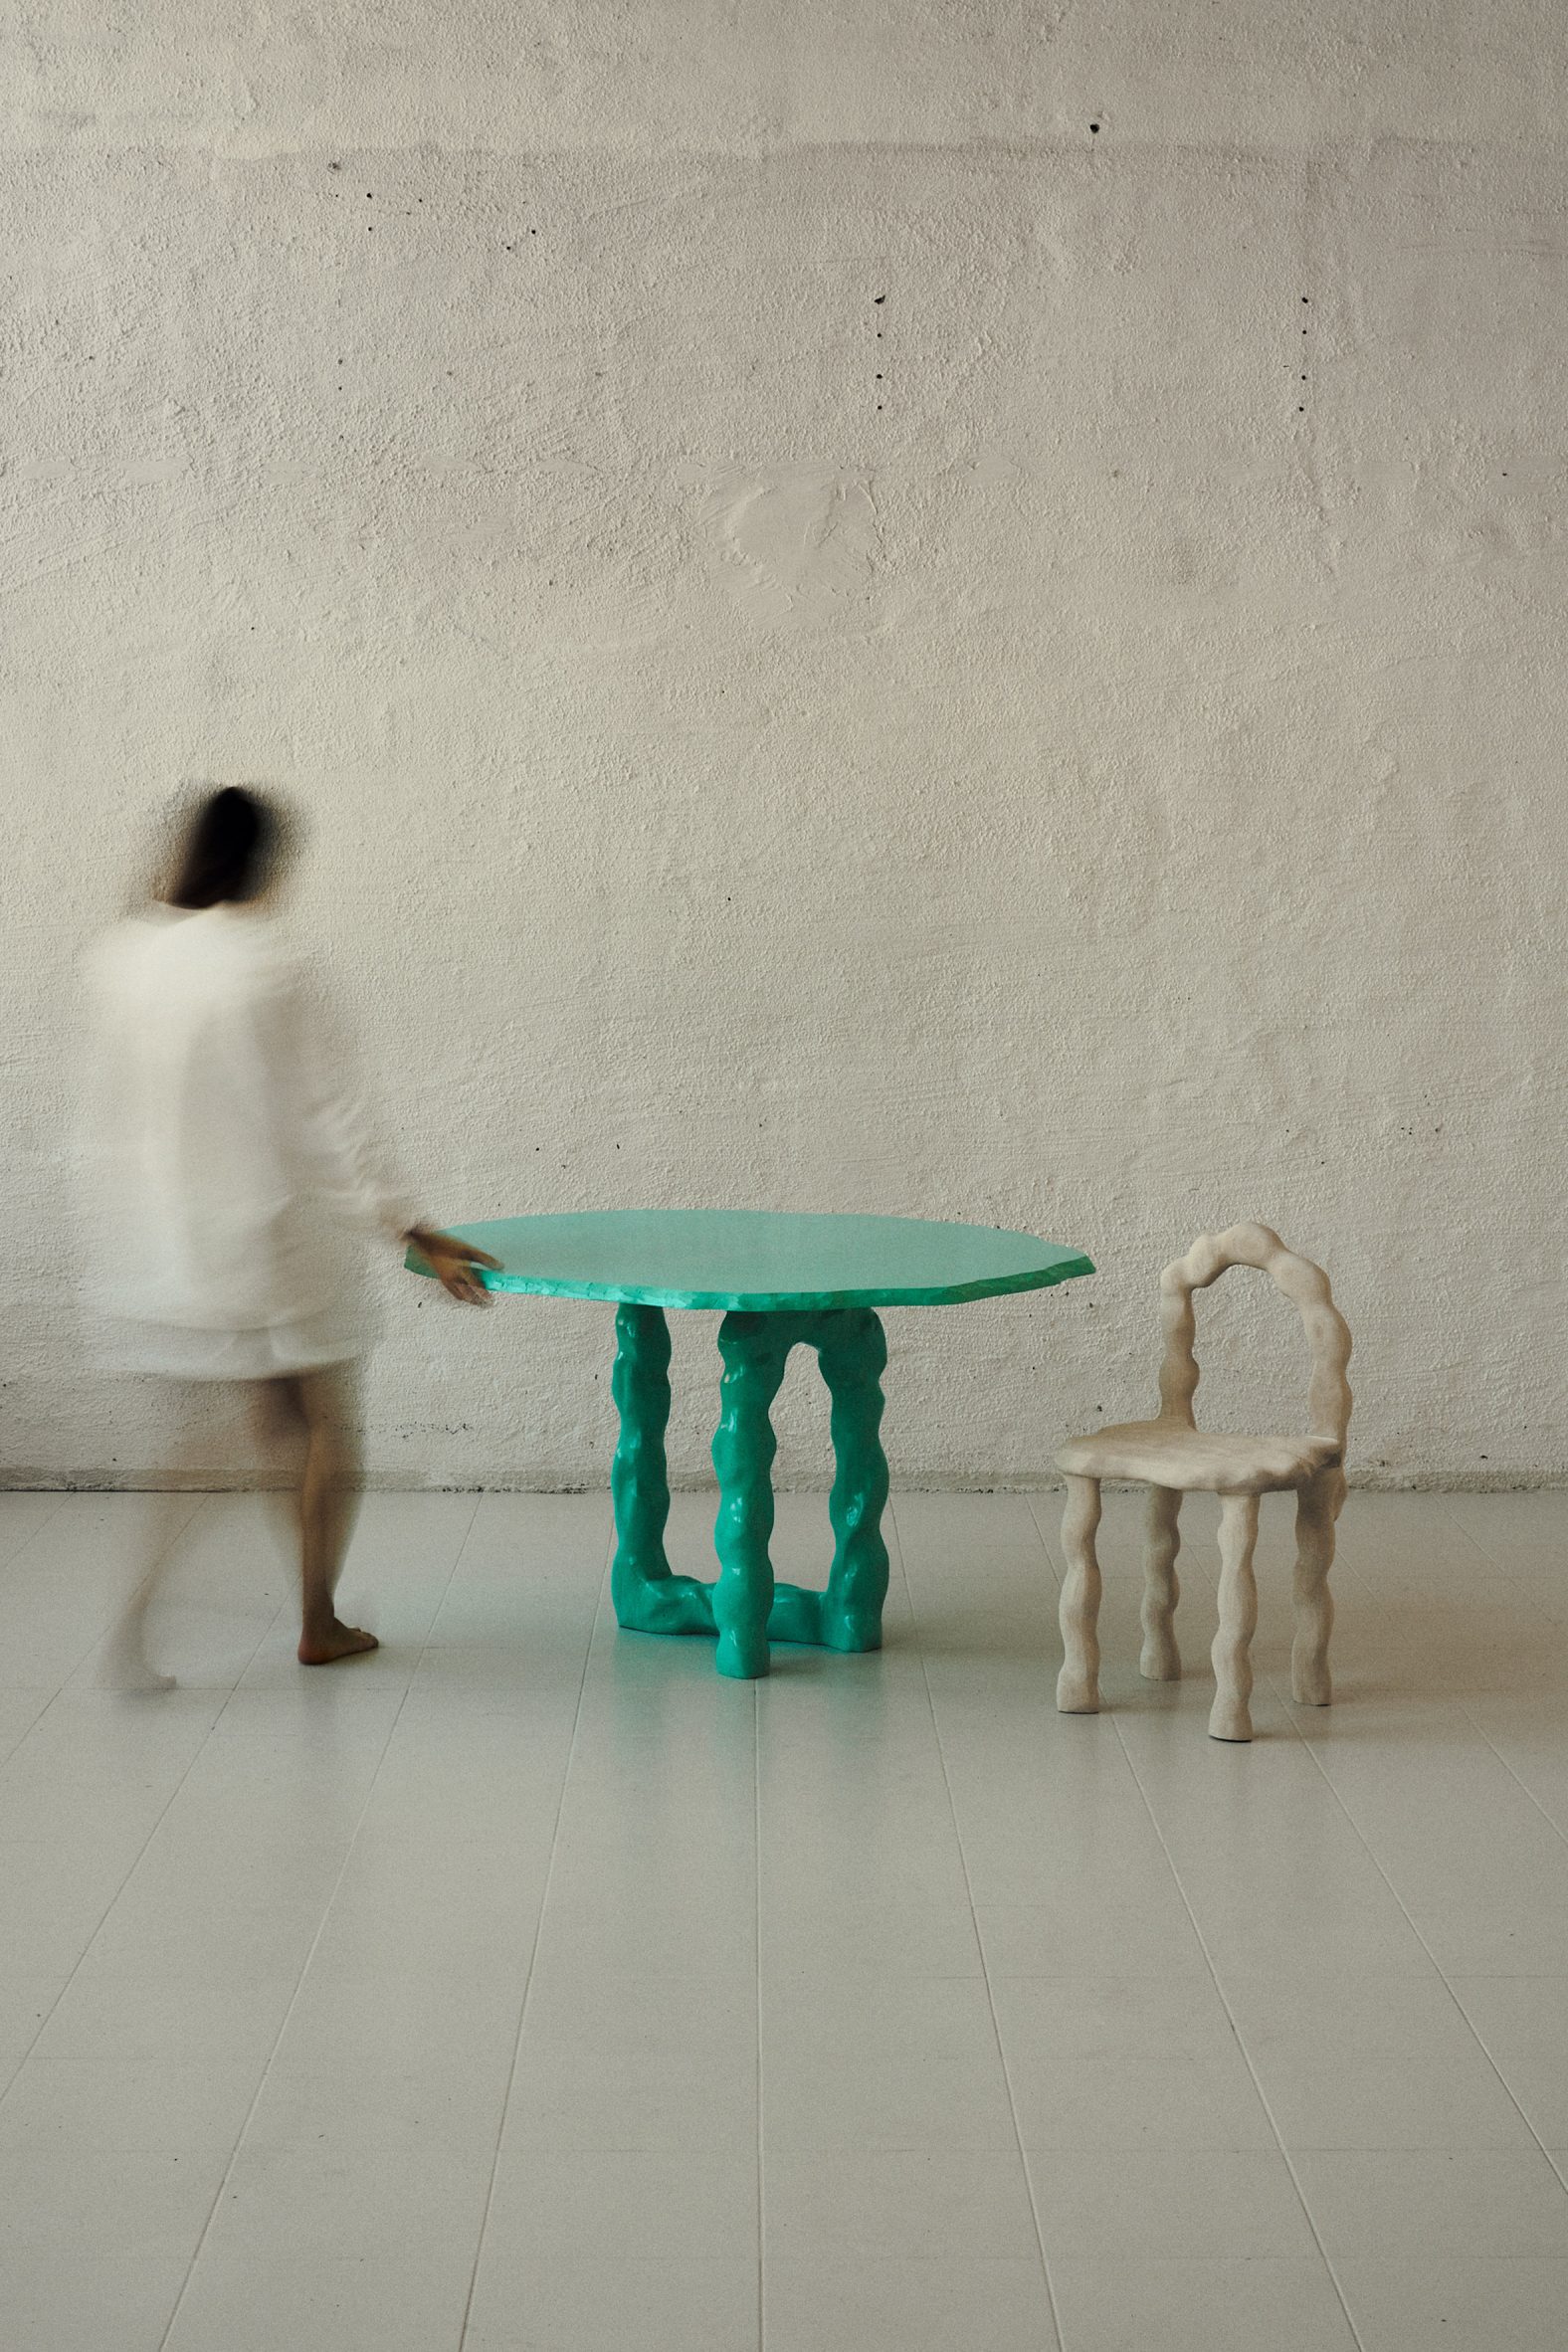 Viride dining chair and dining table by Anna Maria Øfstedal Eng at Ny Normal exhibition by Fold Oslo